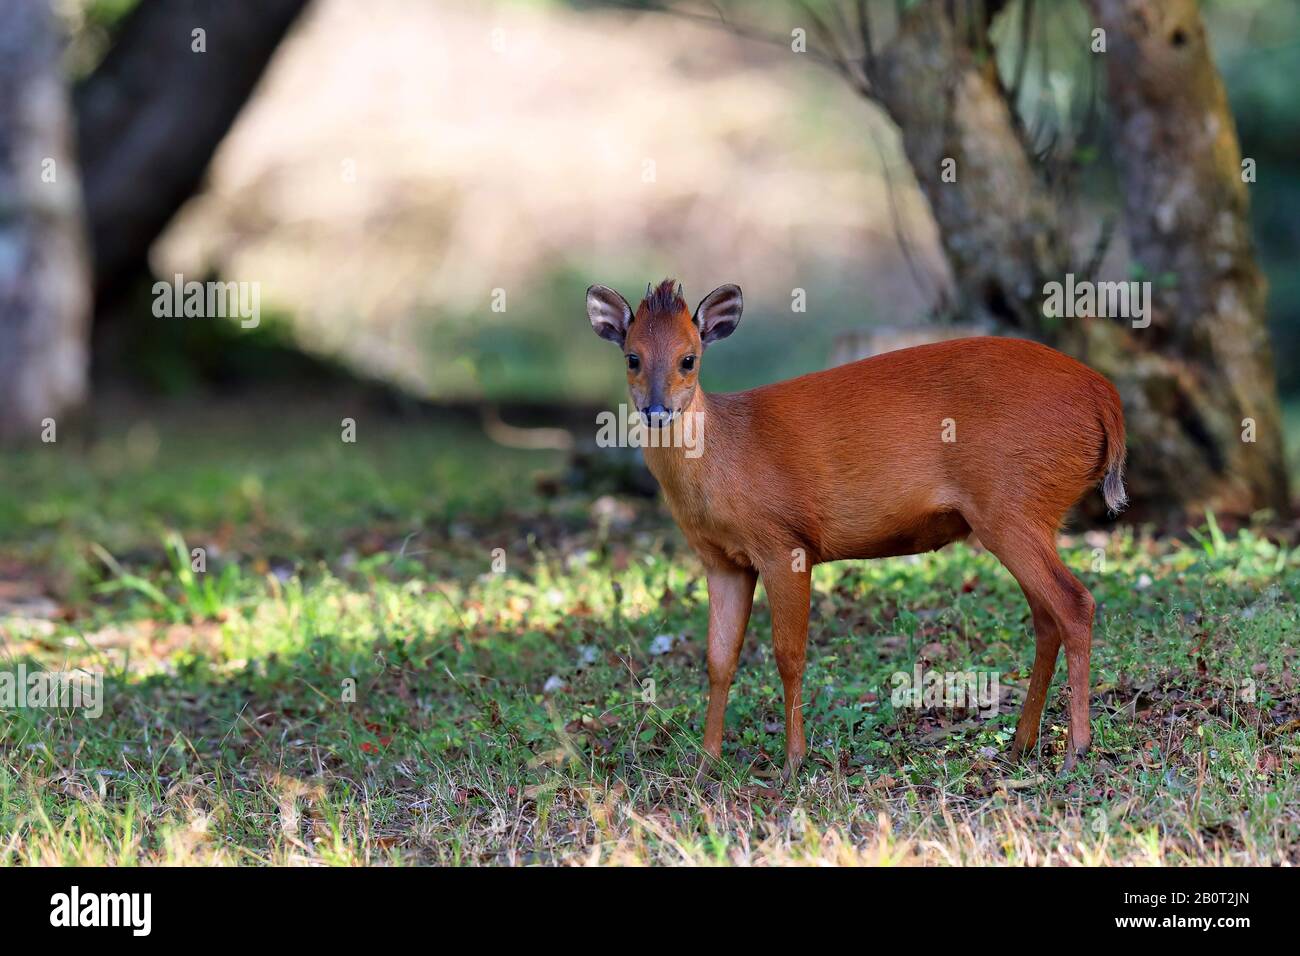 red forest duiker (Cephalophus natalensis), standing in a meadow at the edge of a forest, side view, South Africa, KwaZulu-Natal, iSimangaliso National Park Stock Photo